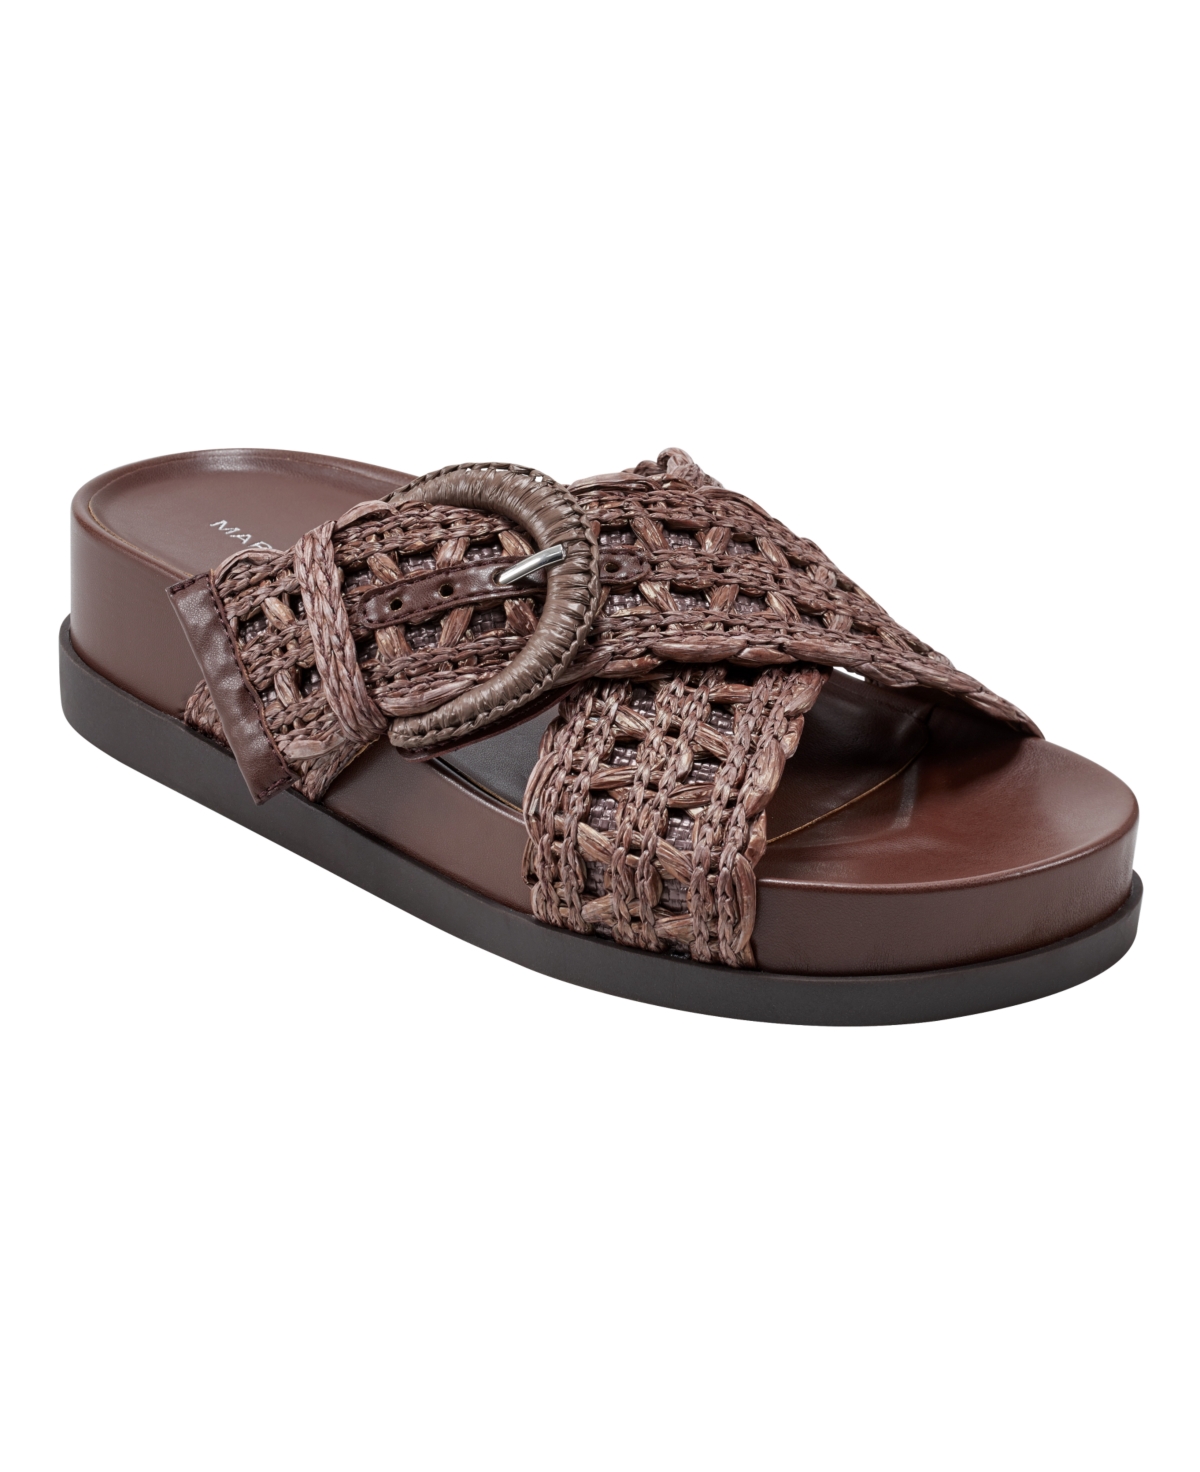 Women's Welti Slip-On Flat Casual Sandals - Dark Brown- Manmade and Textile